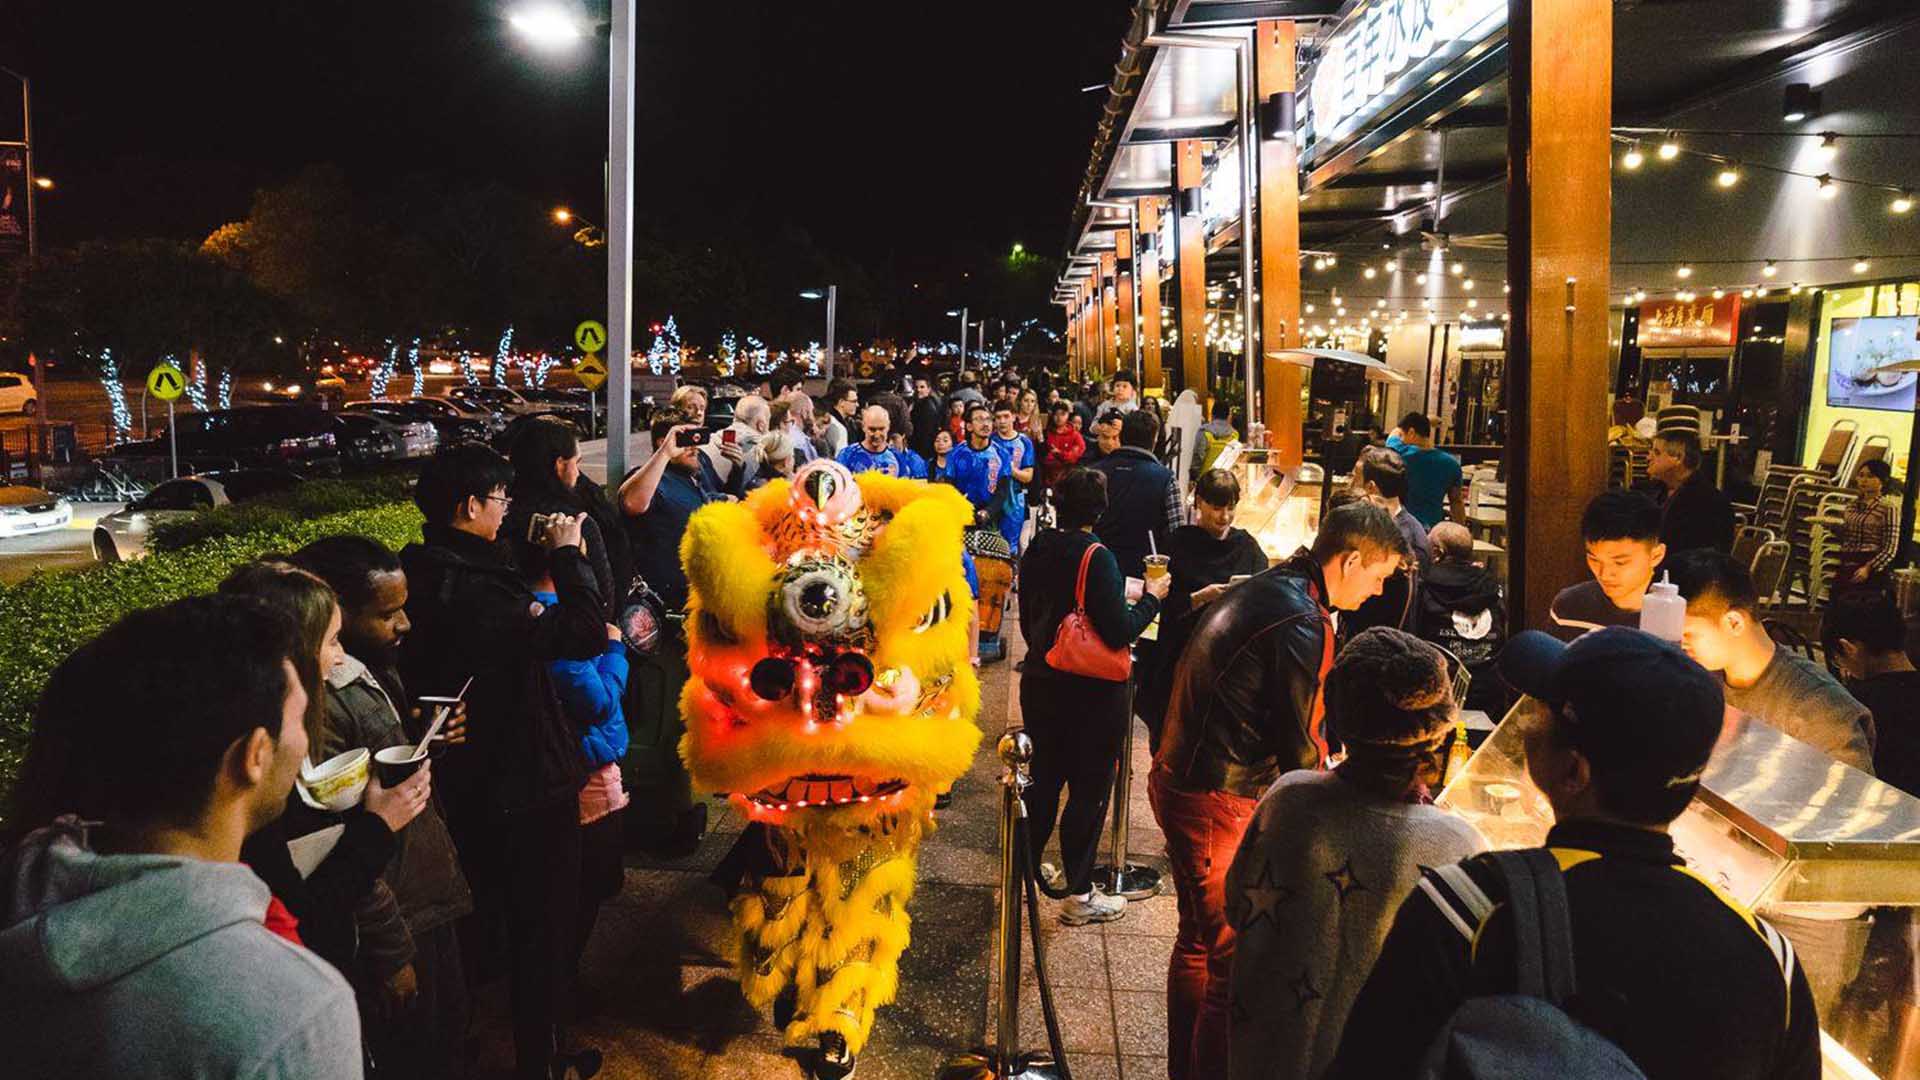 Sunnybank Food Trail Is Bringing Back Its Self-Guided Culinary Feast for the First Time Since 2019